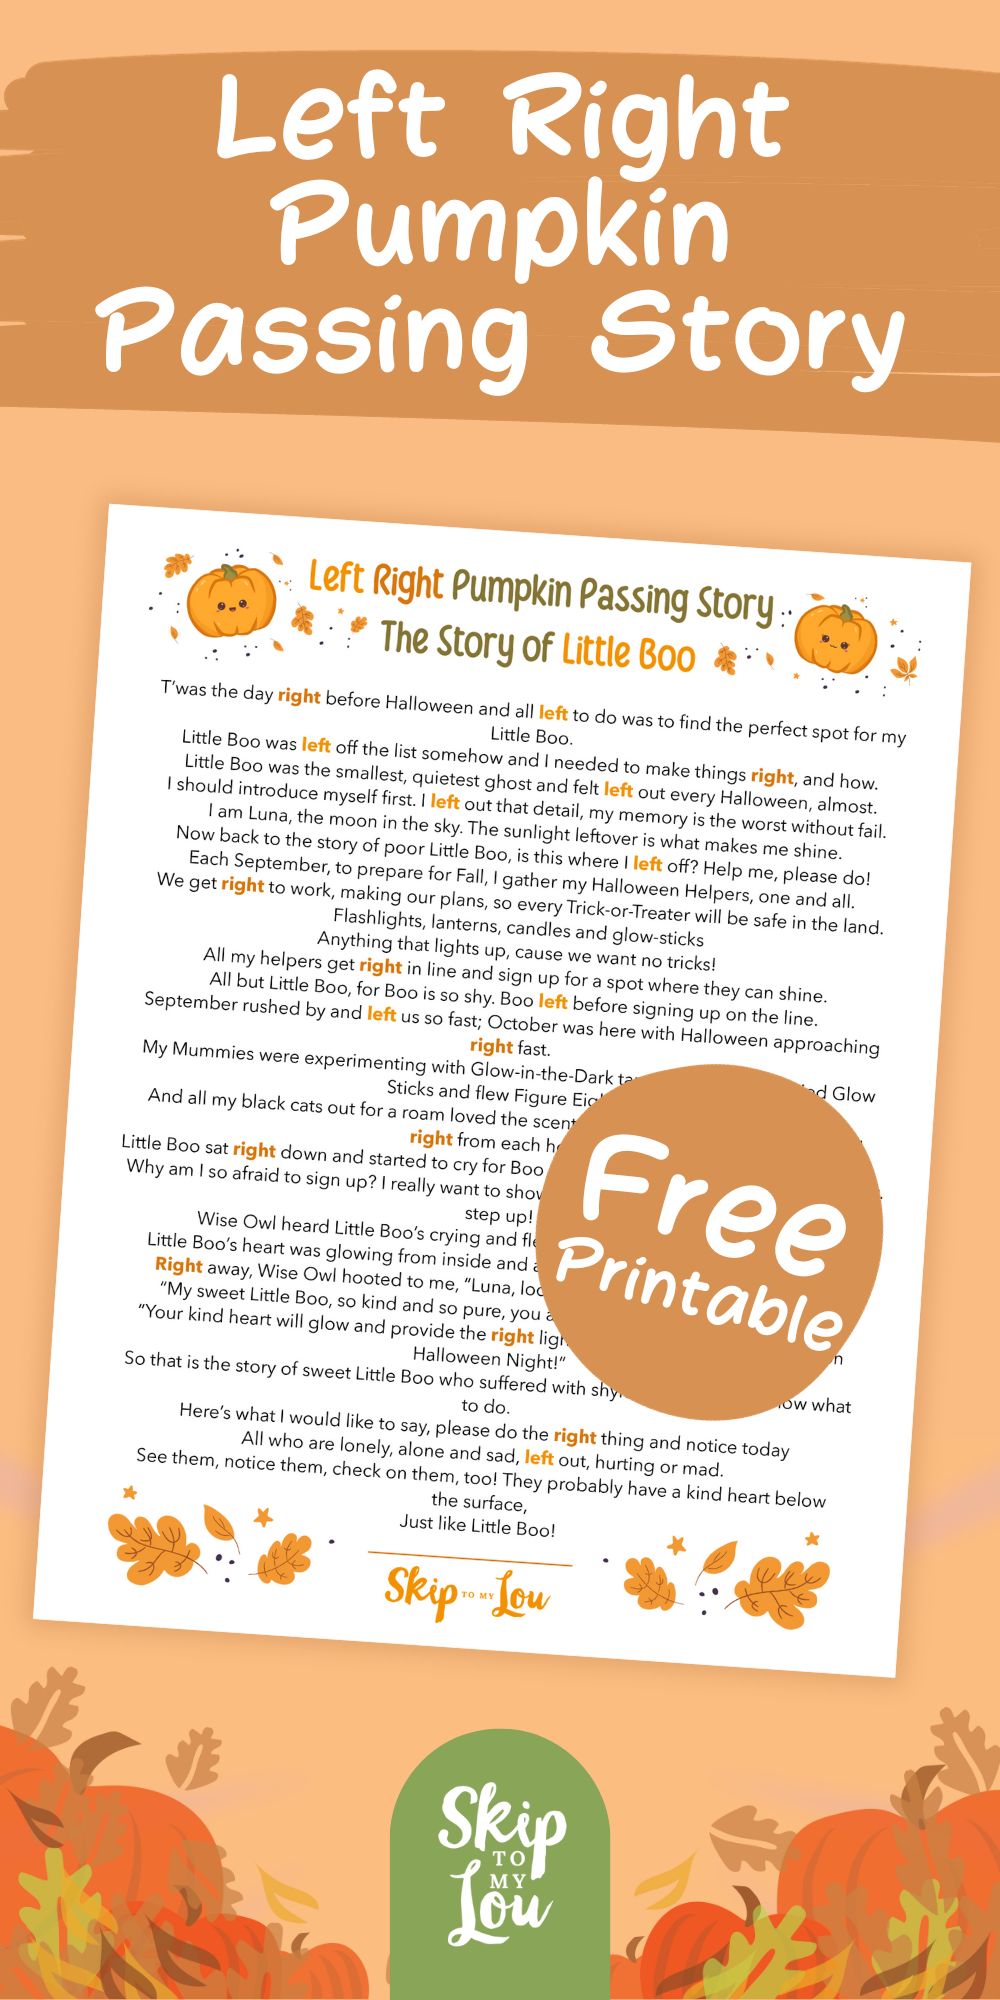 Free Printable copy of the story of Little Boo, Pumpkin Passing Game, by Skip to my Lou.